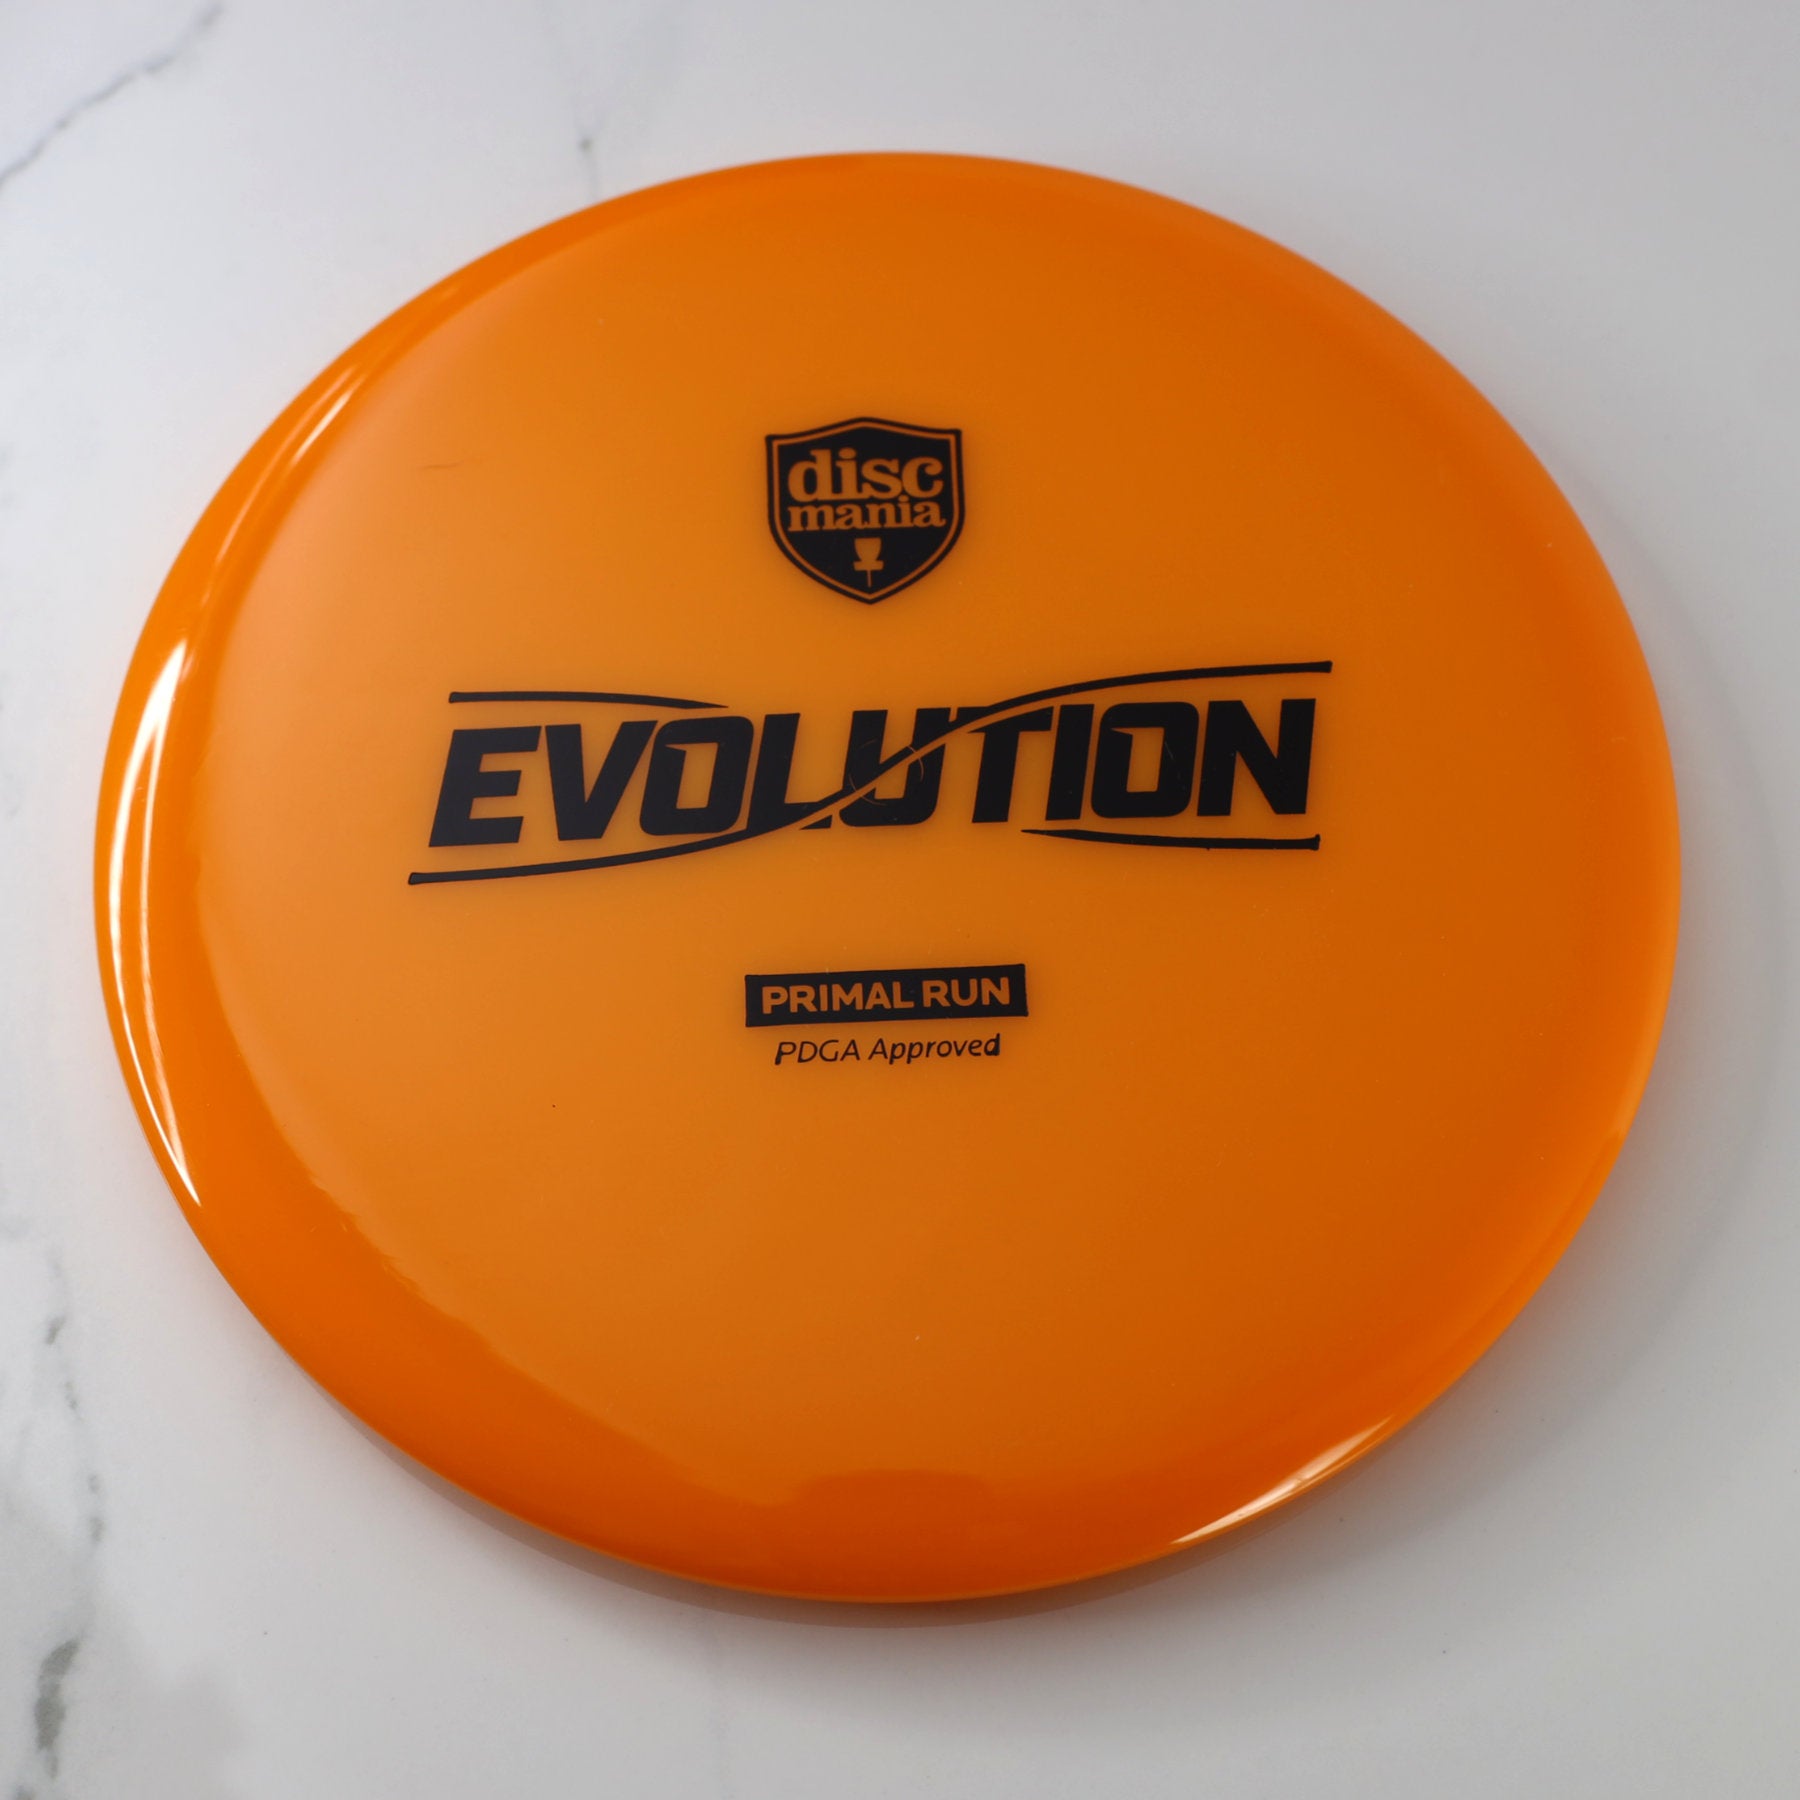 All Discmania - Select to View Color Options